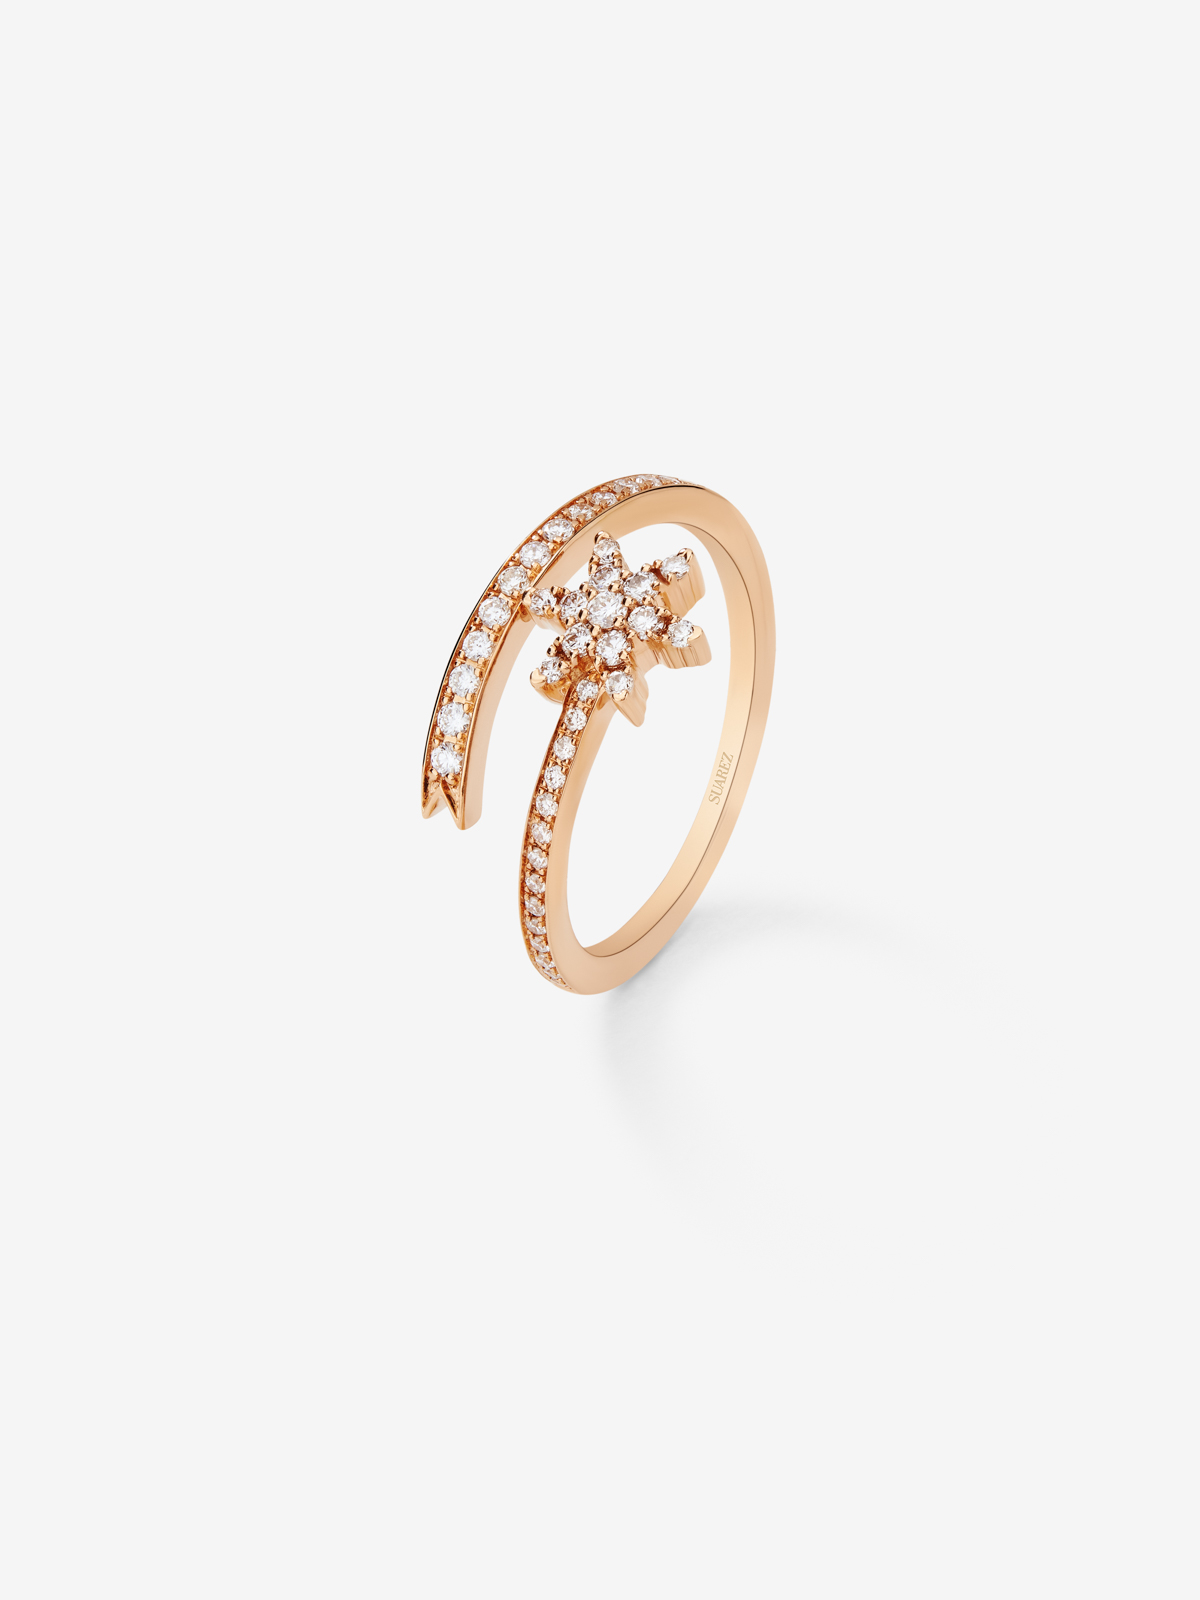 Open cross star ring in 18K rose gold with diamonds